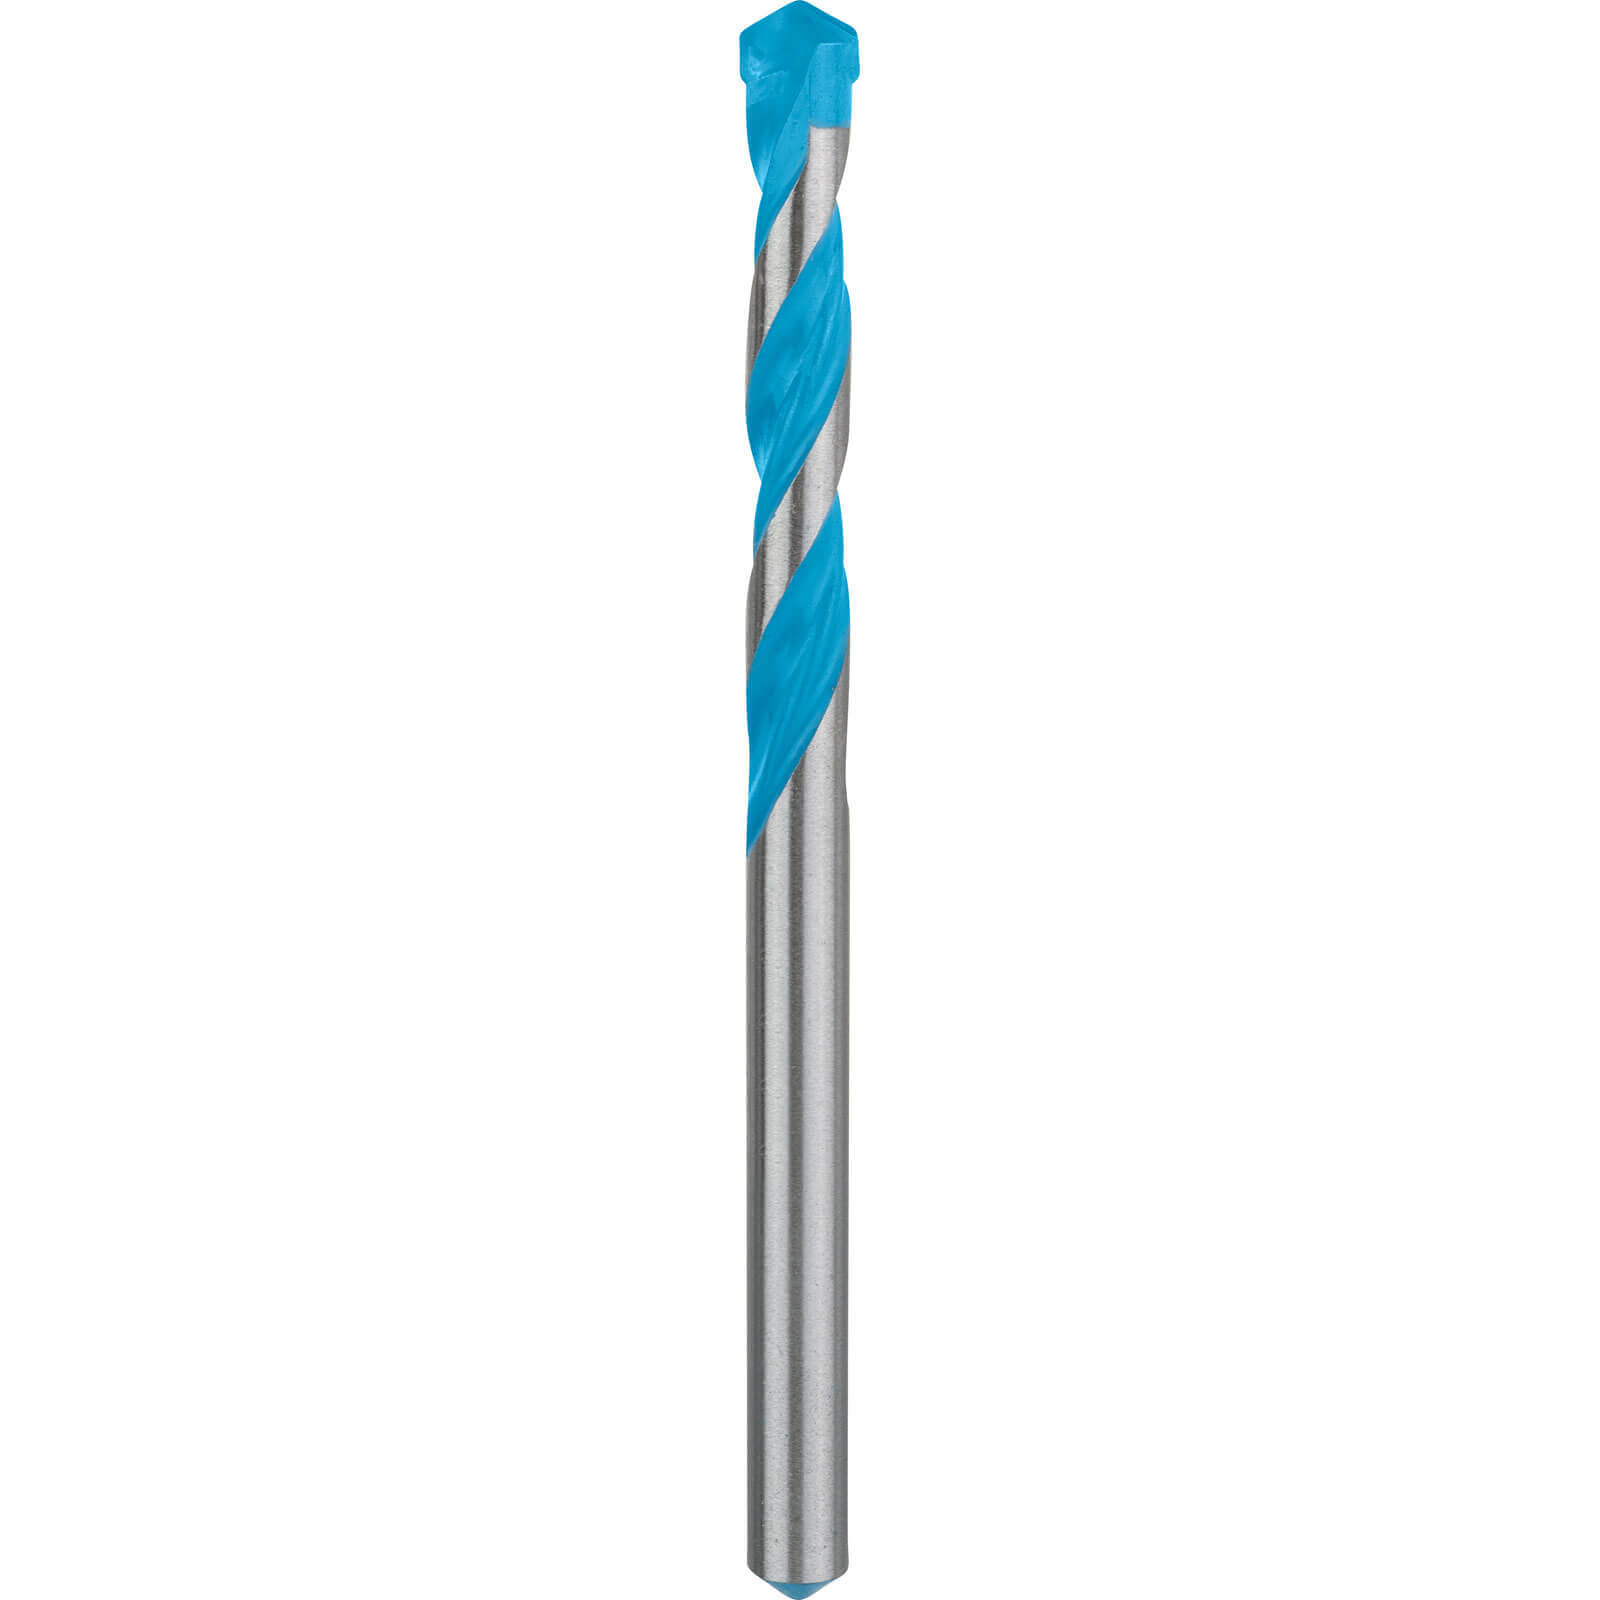 Photo of Bosch Expert Cyl-9 Multi Construction Drill Bit 11mm 150mm Pack Of 1